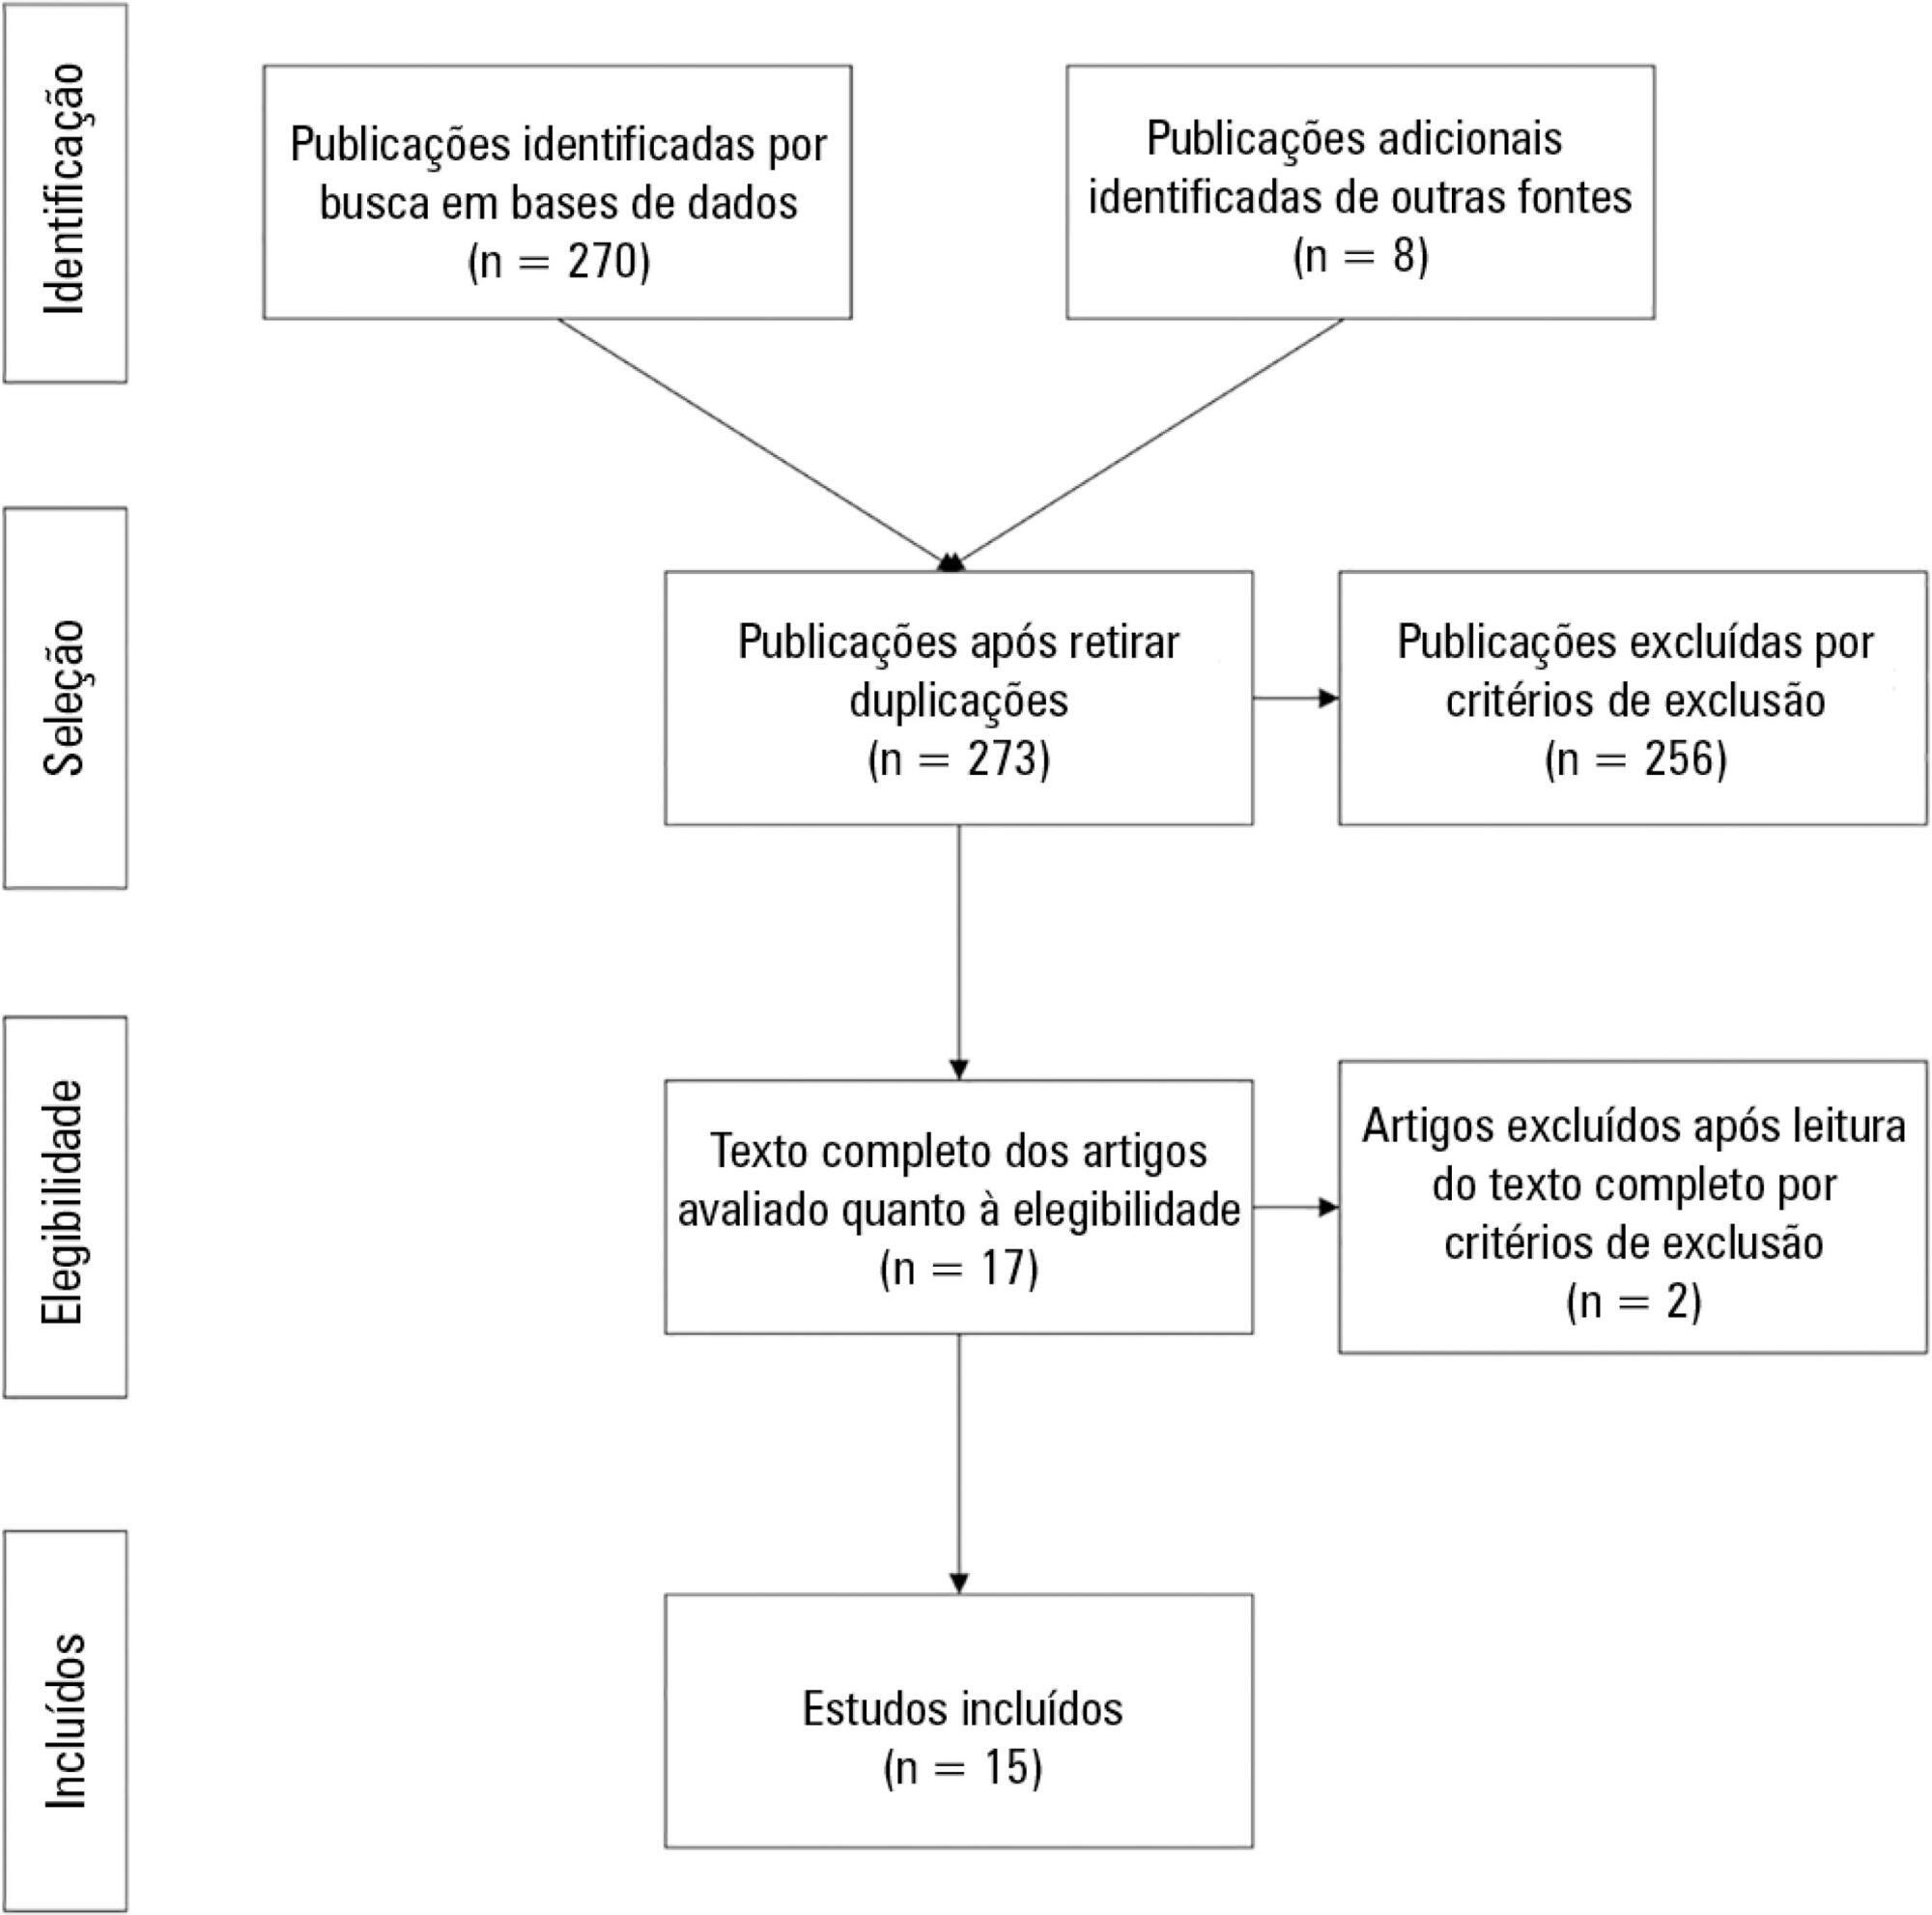 Effectiveness of rapid response teams in reducing intrahospital cardiac arrests and deaths: a systematic review and meta-analysis